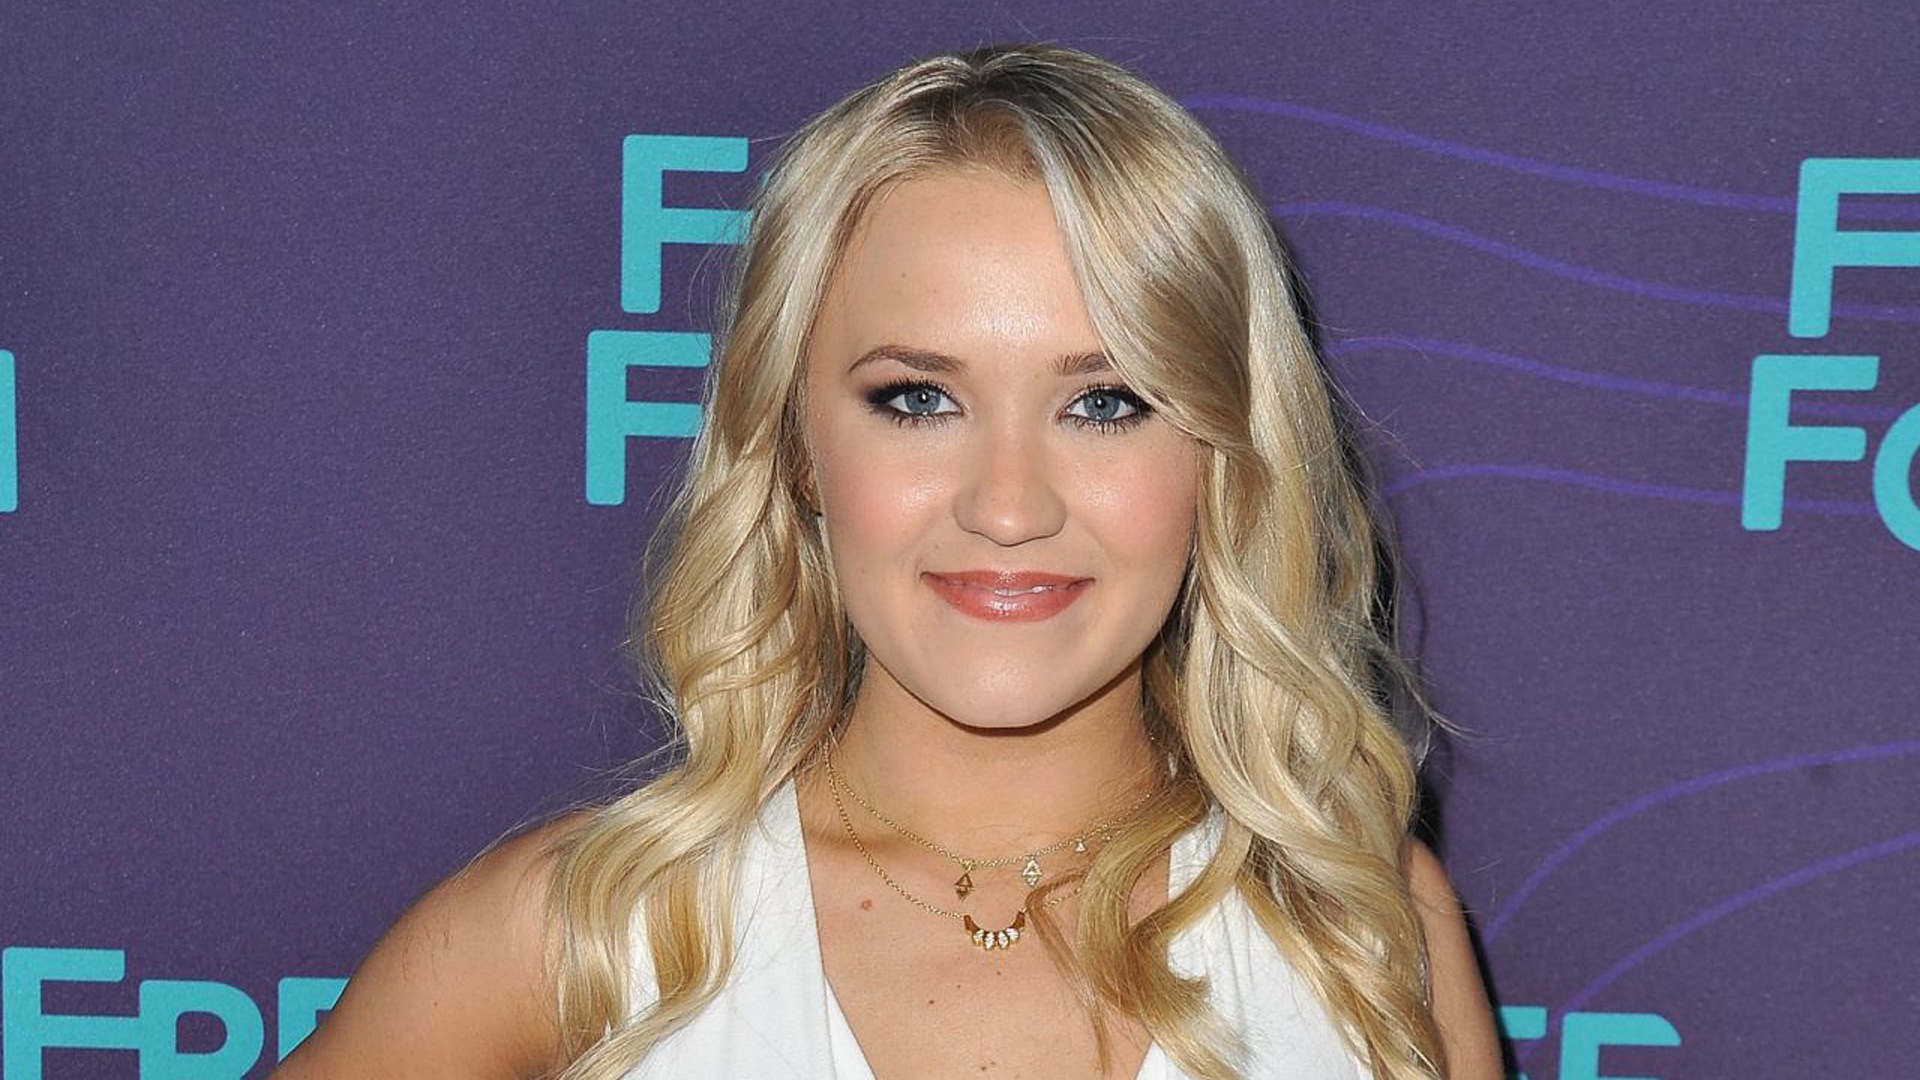 Emily Osment Images. 